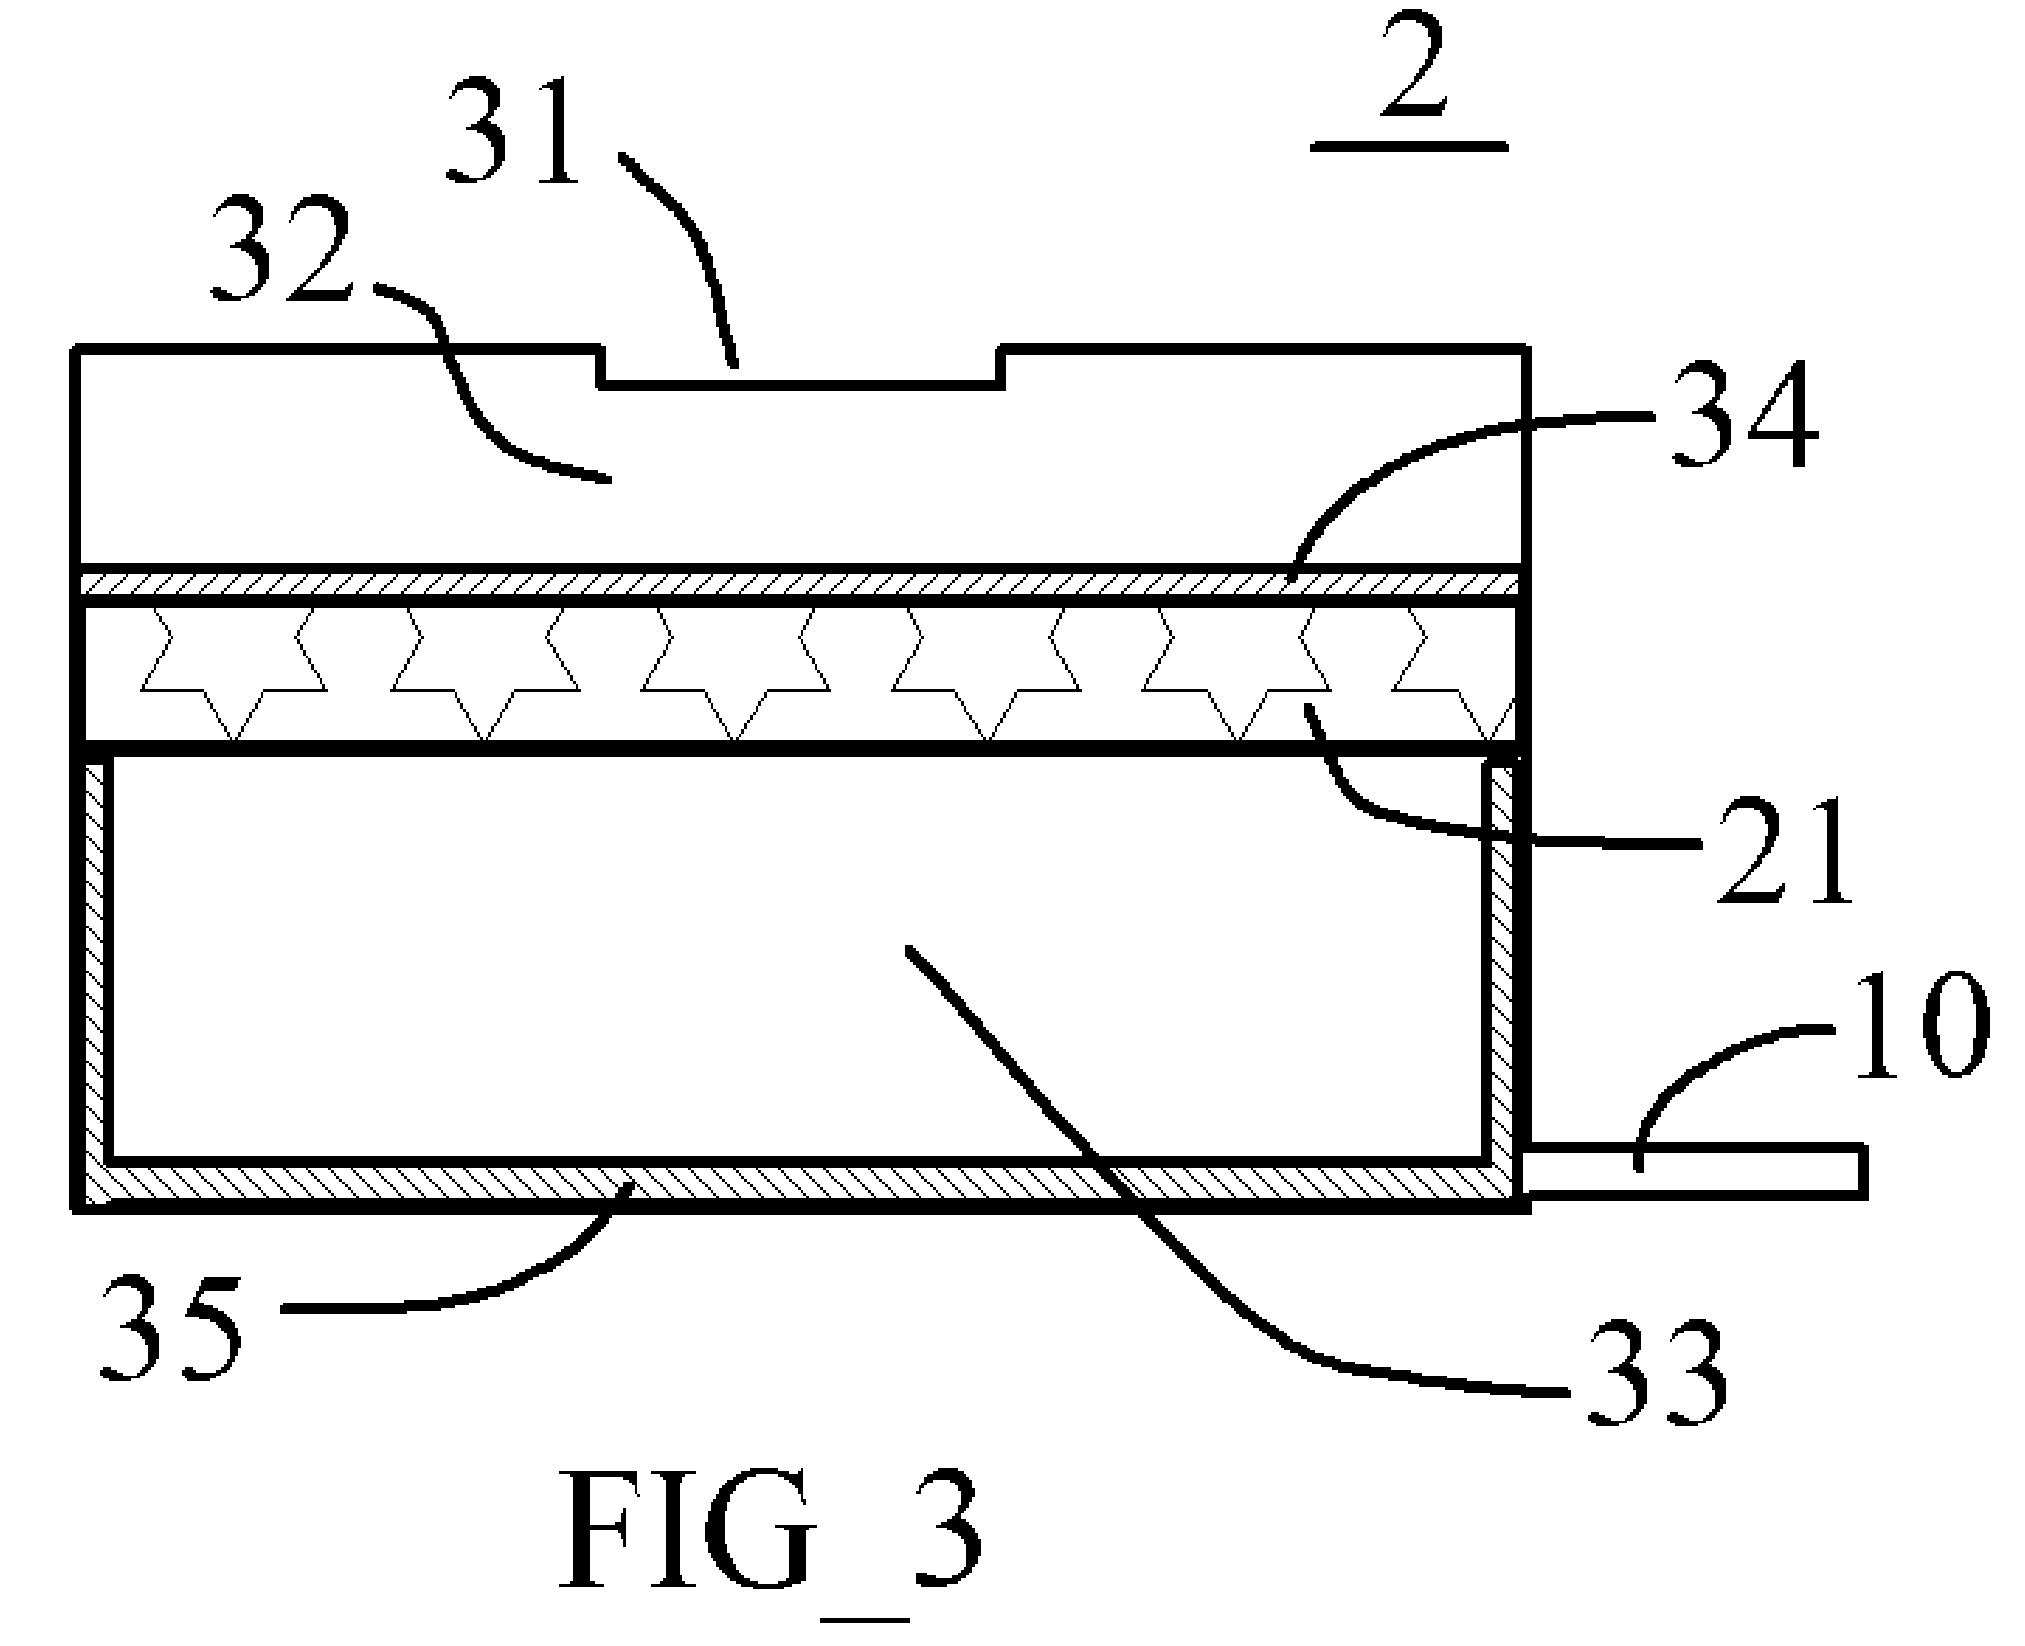 Micromachined diagnostic device with controlled flow of fluid and reaction